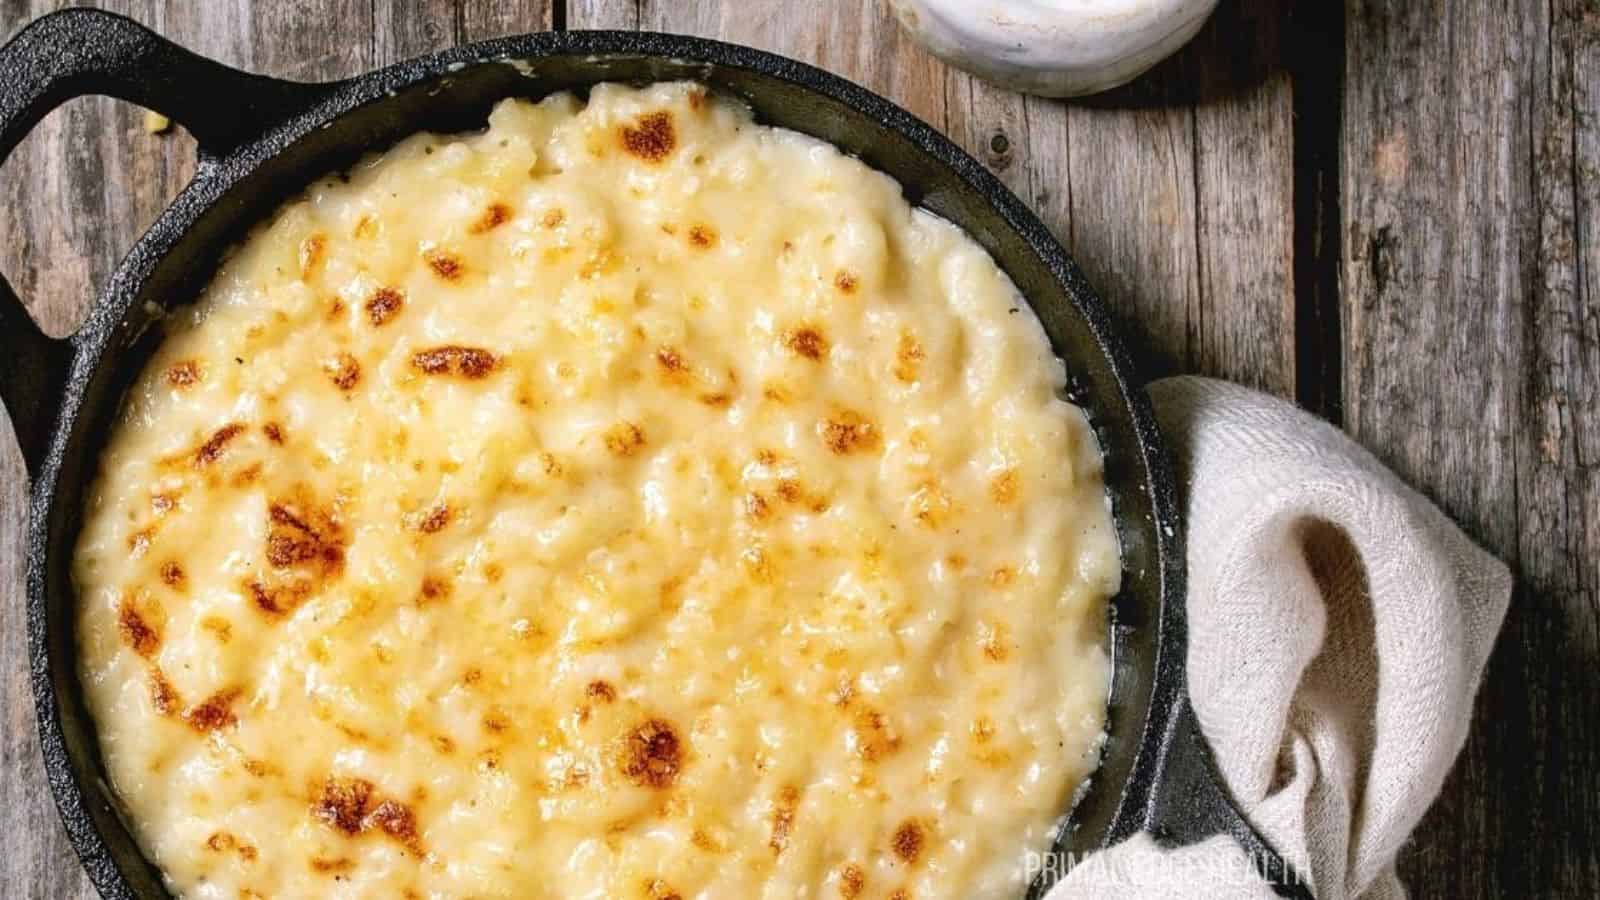 A picture of baked cauliflower mac and cheese in cast iron skillet on wooden table.